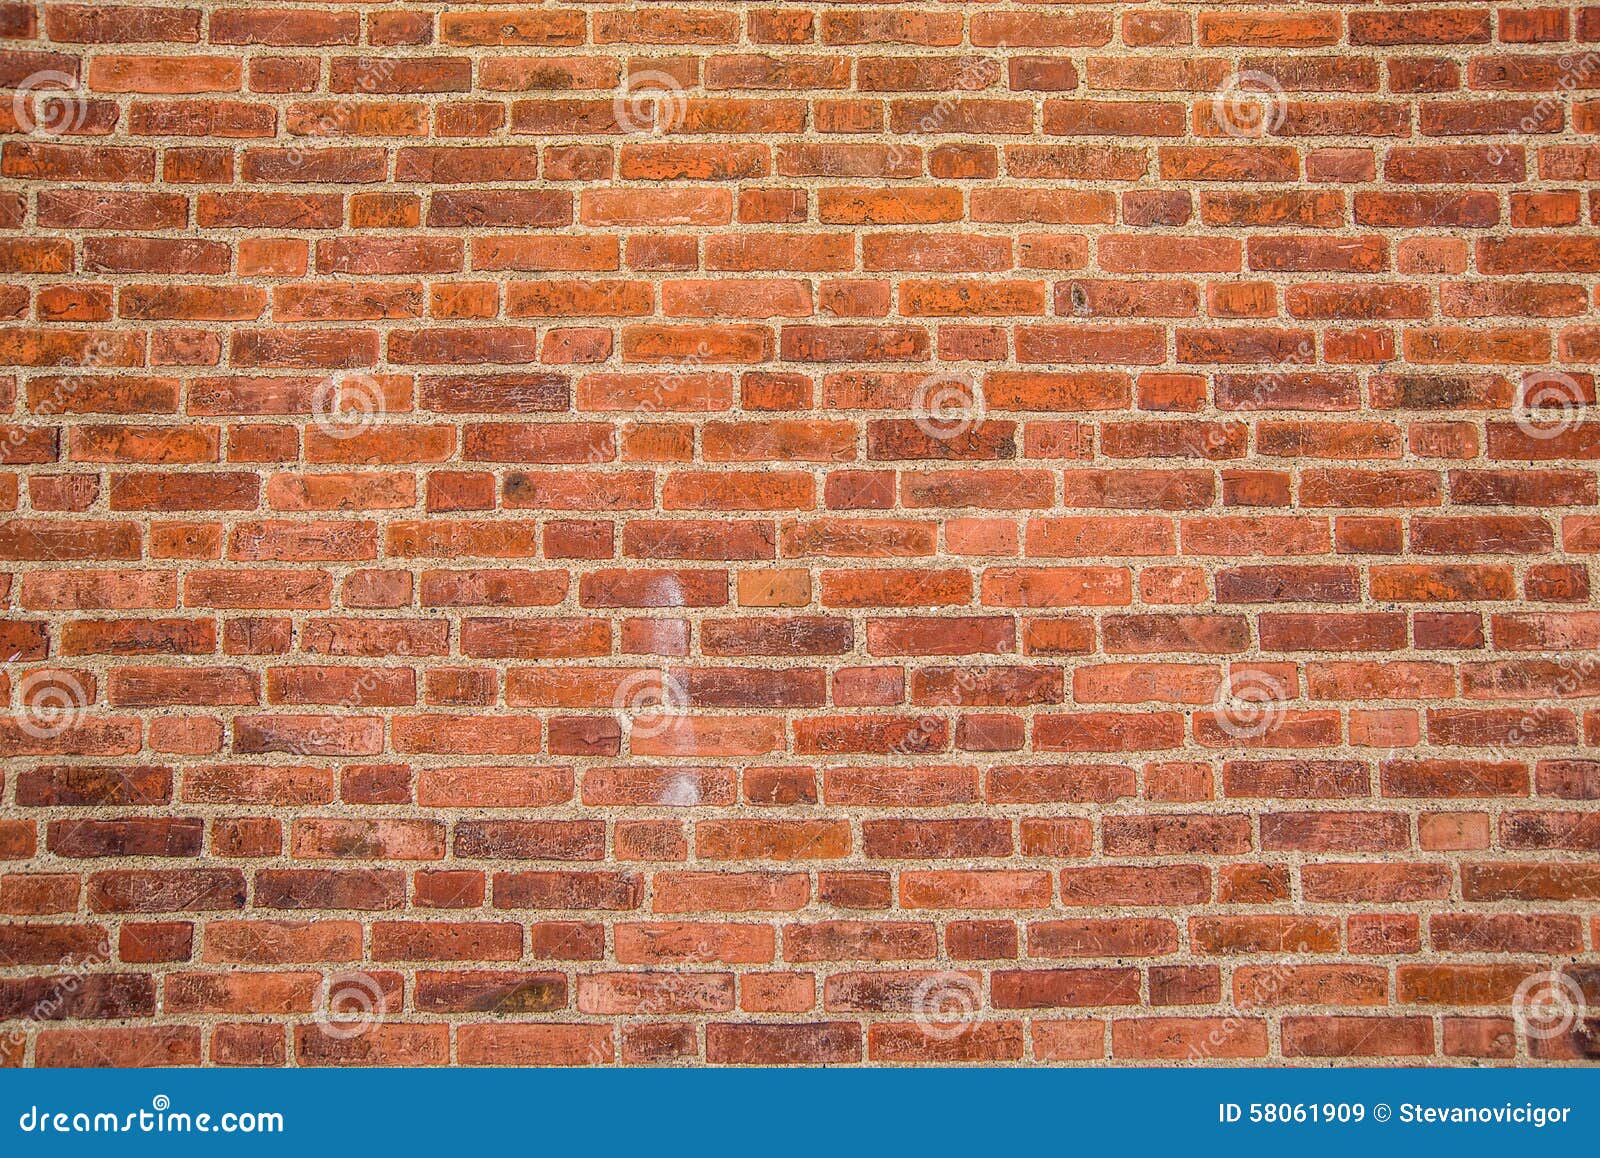 solid rustic red bricks wall surface